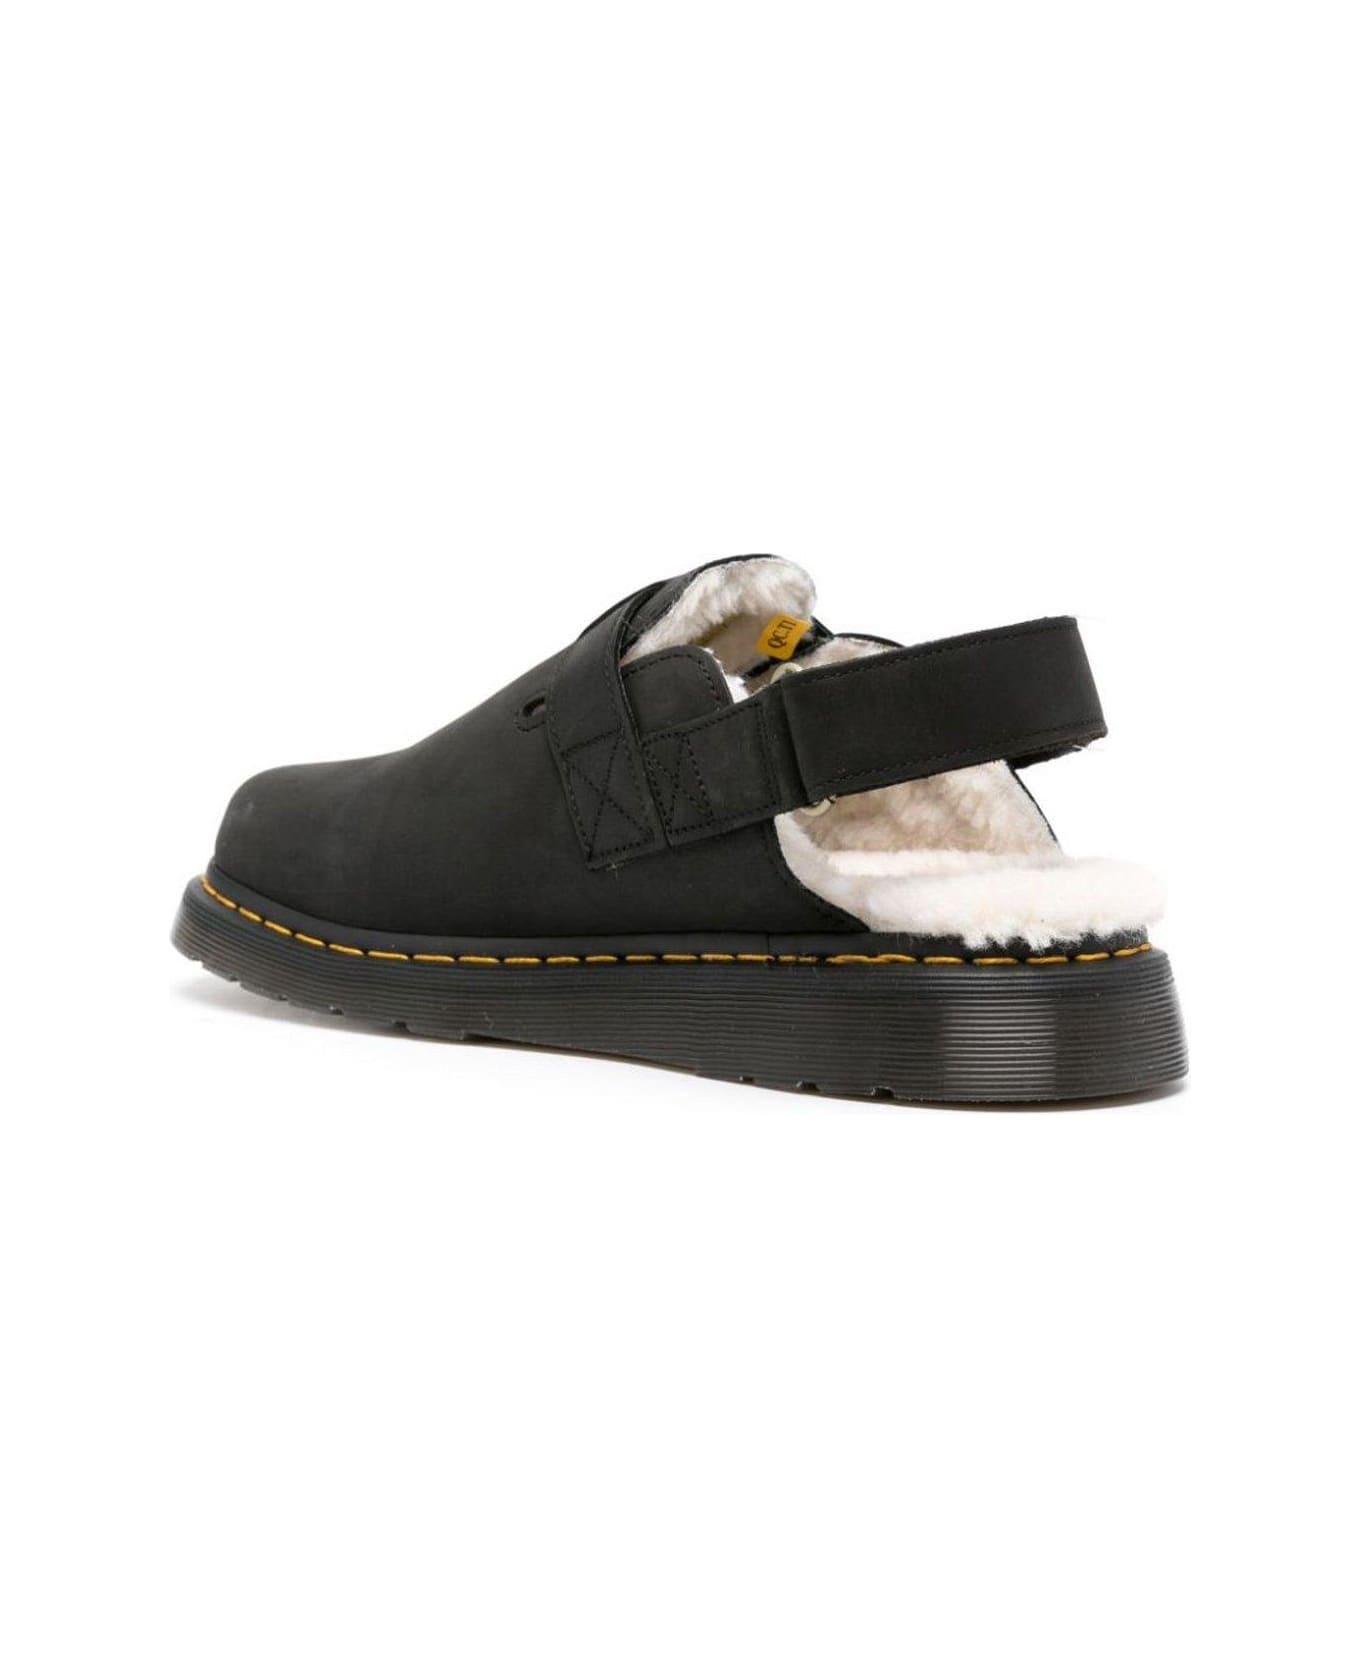 Dr. Martens Jorge Ii Buckle Fastened Mules - Black その他各種シューズ